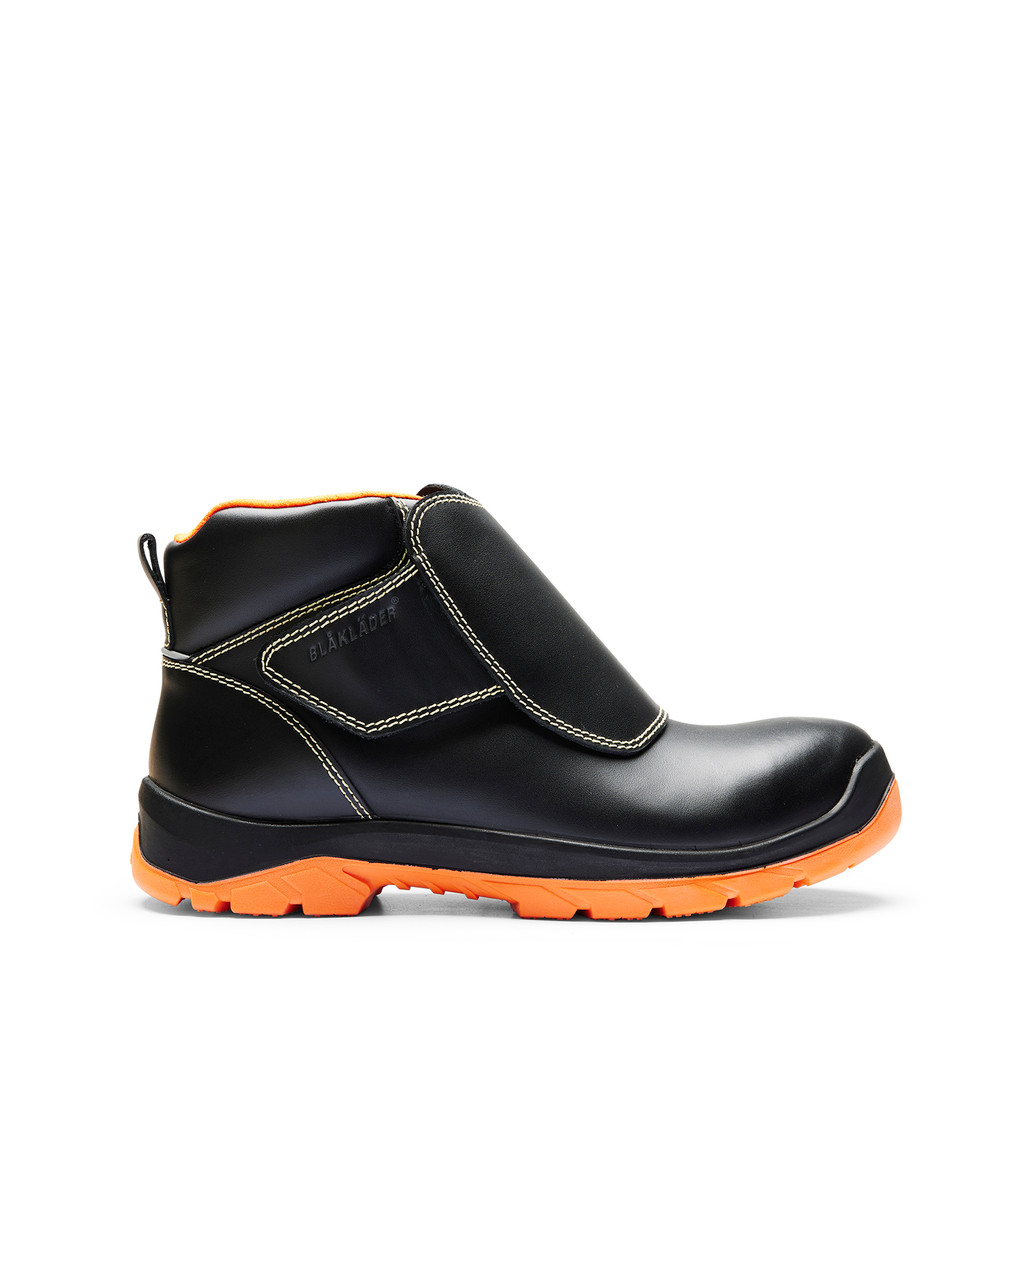 Buy online in Australia and New Zealand a BLAKLADER WELDING Safety Boots for Welders that perform exceptionally for Fabrication